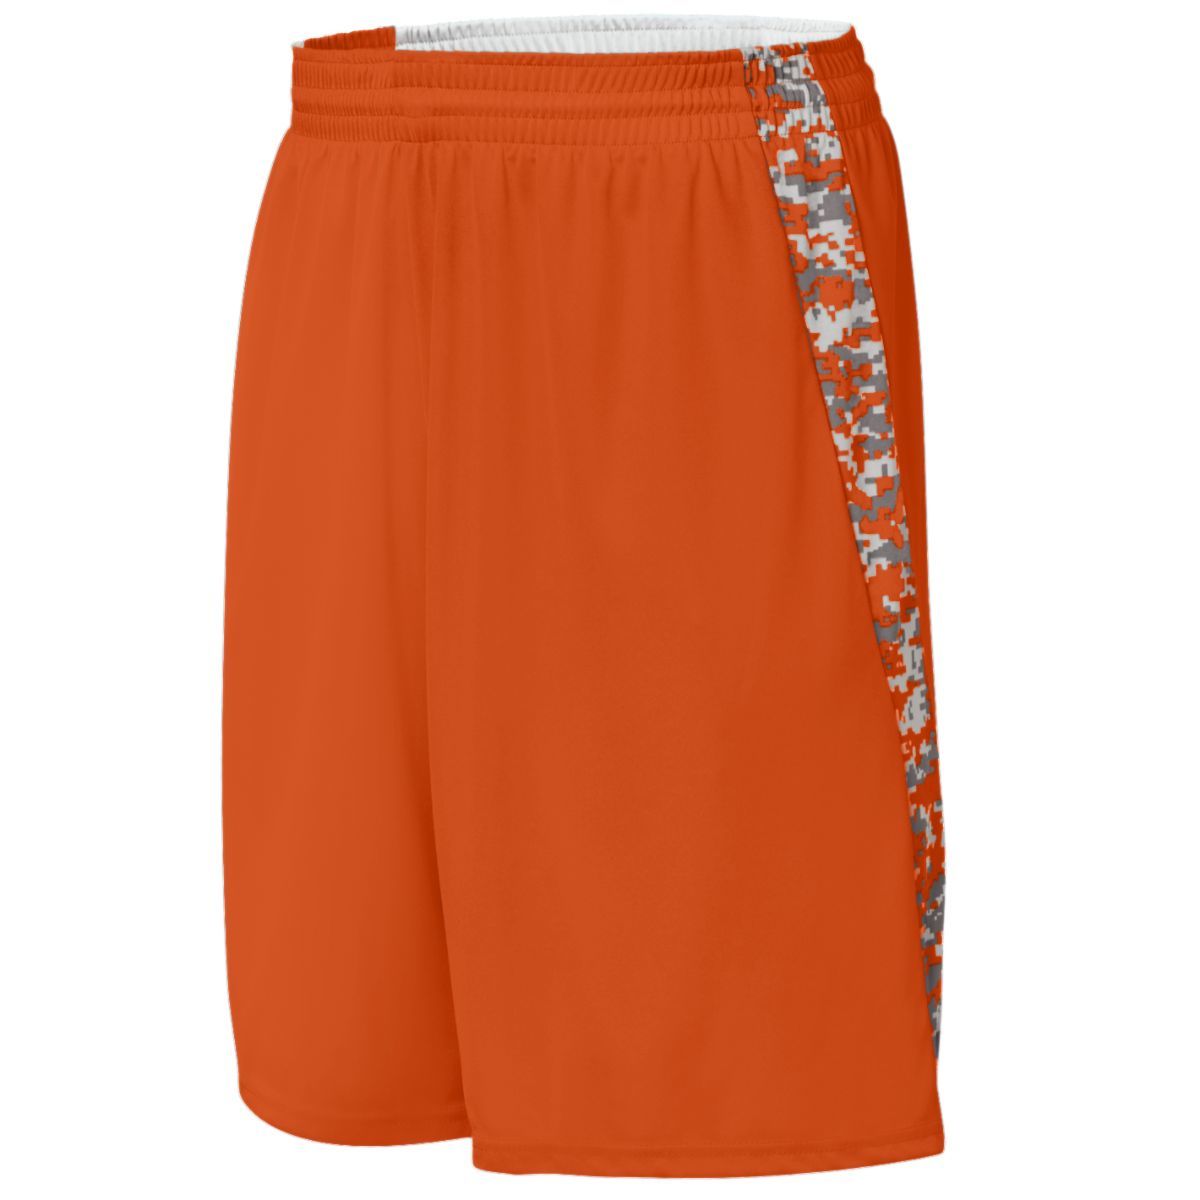 Augusta Sportswear Youth Hook Shot Reversible Shorts in Orange/Orange Digi  -Part of the Youth, Youth-Shorts, Augusta-Products, Basketball, All-Sports, All-Sports-1 product lines at KanaleyCreations.com